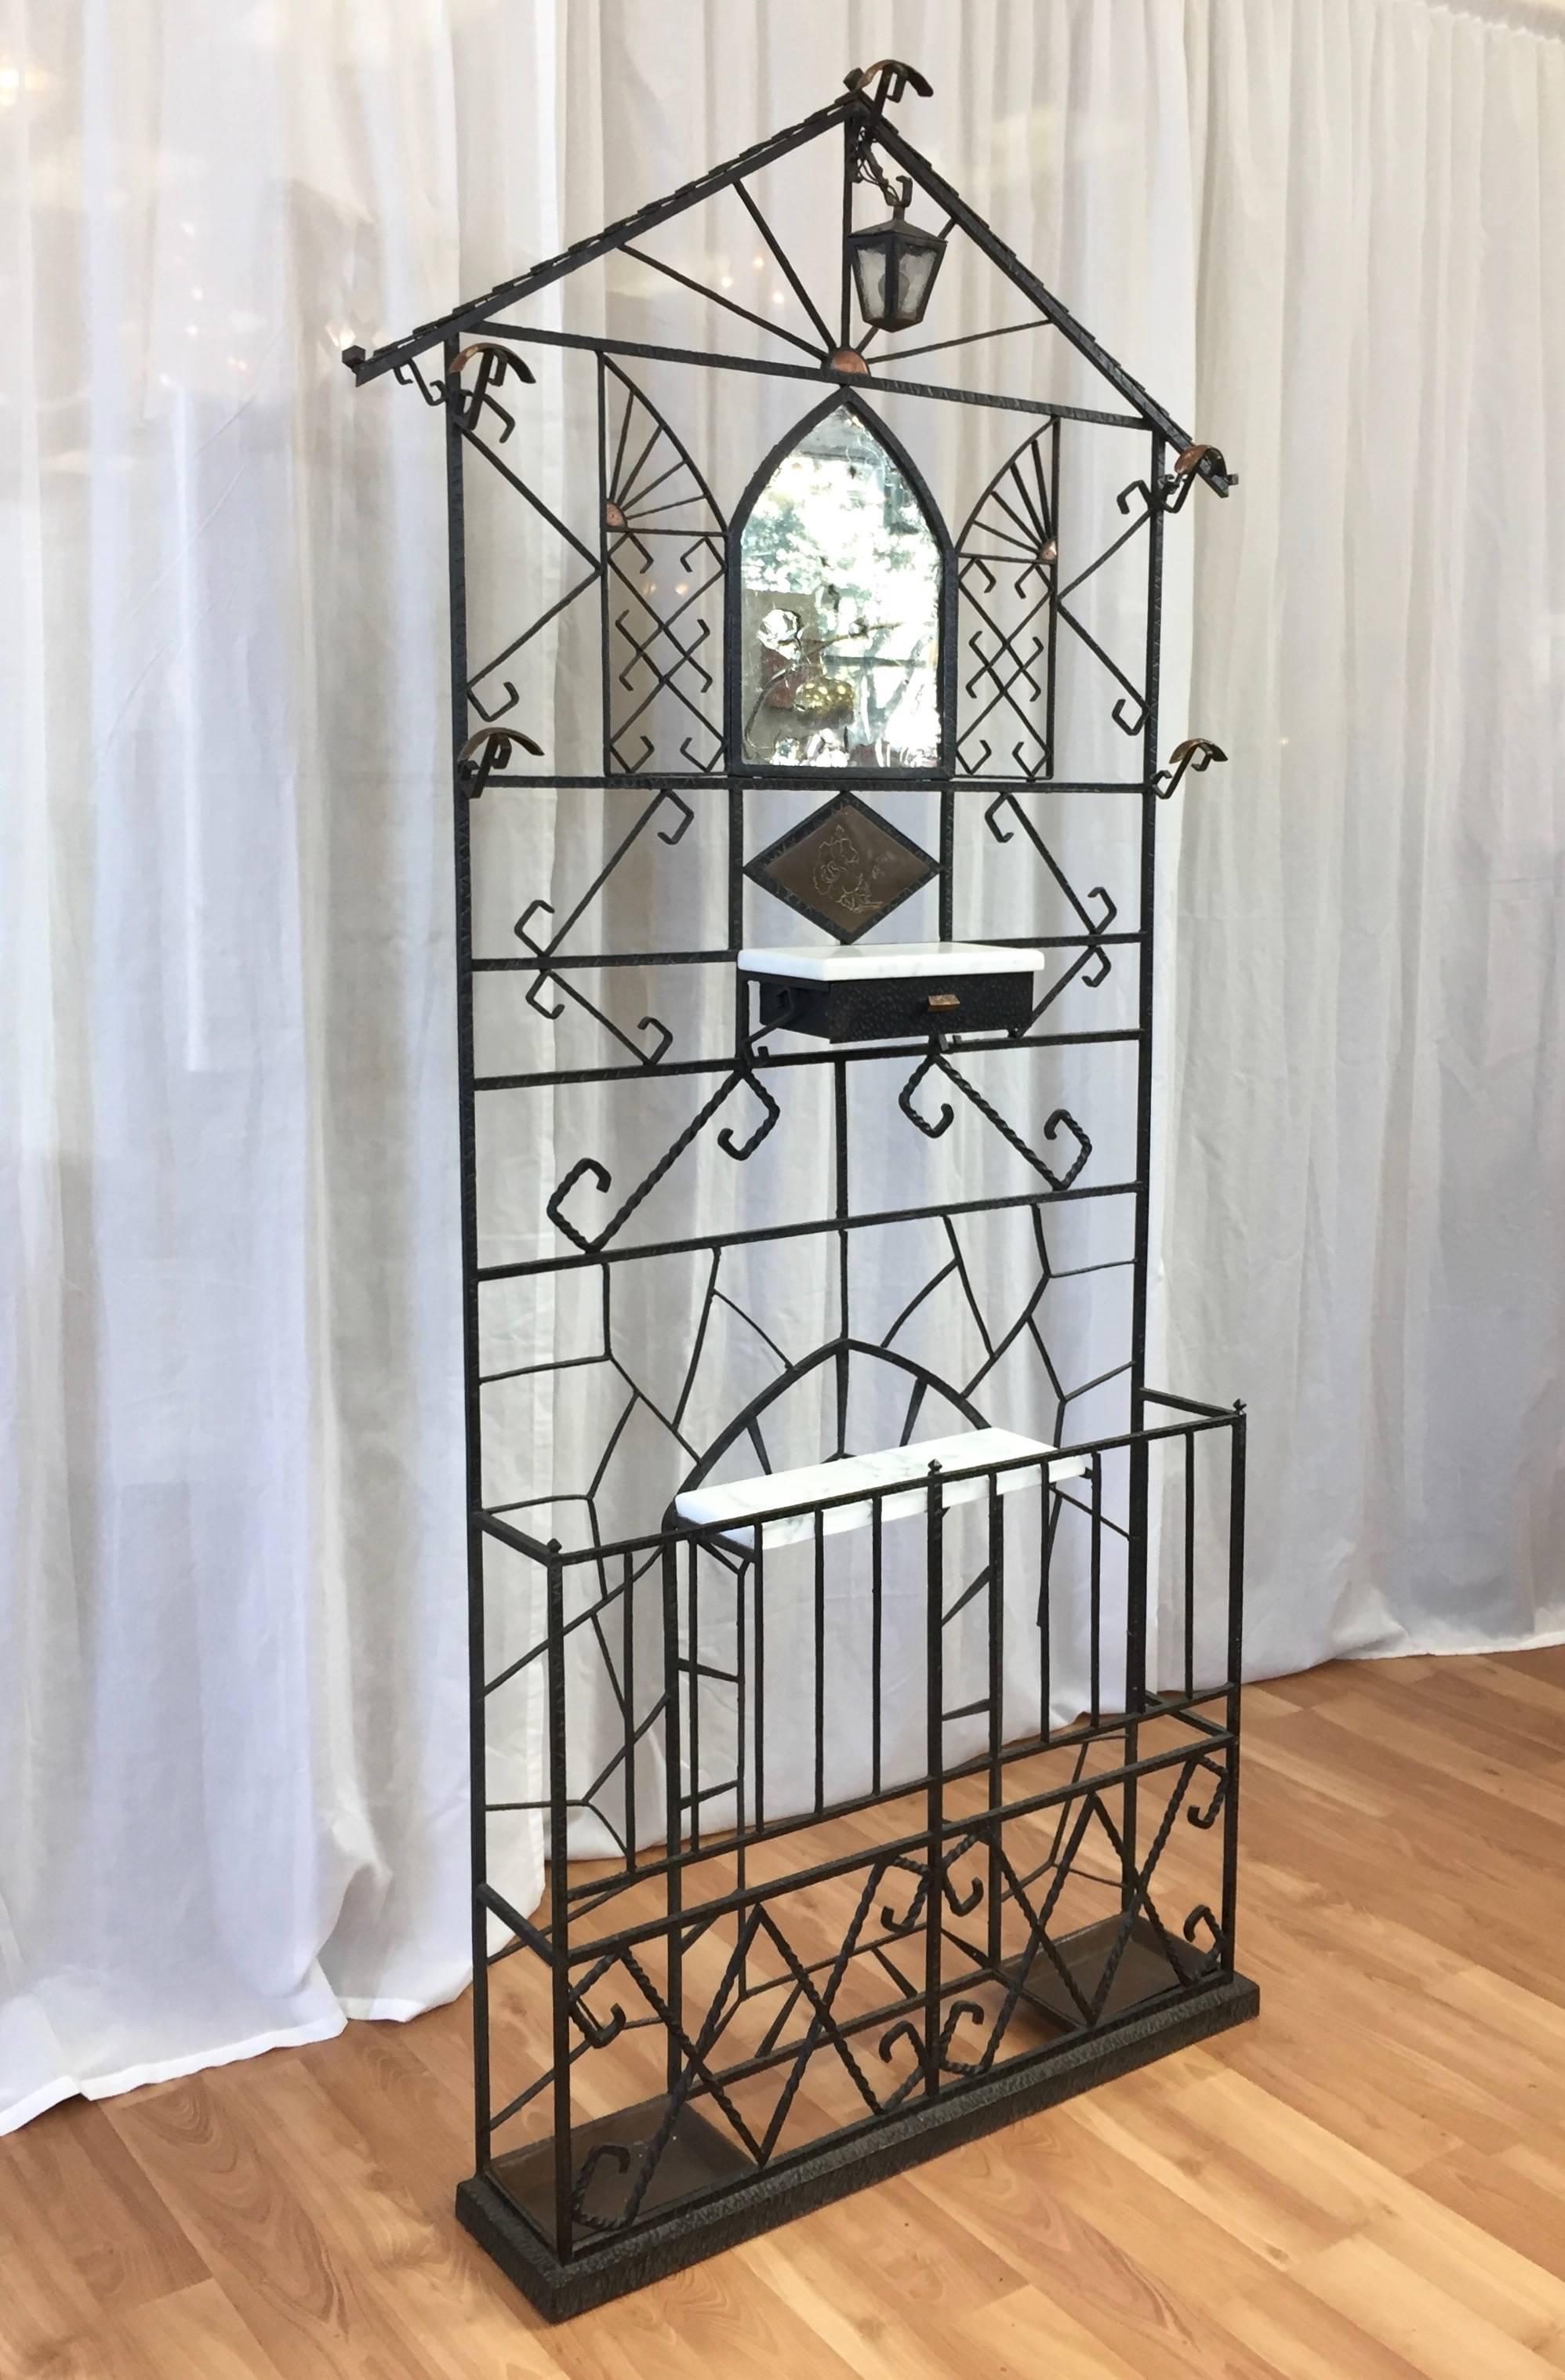 A towering French wrought iron hall tree or stand with copper, marble, and mirror elements.

Greet your guests in style with this gothic-infused Art Deco show stopper. Textured black wrought iron frame has shingle detailing on top, from which